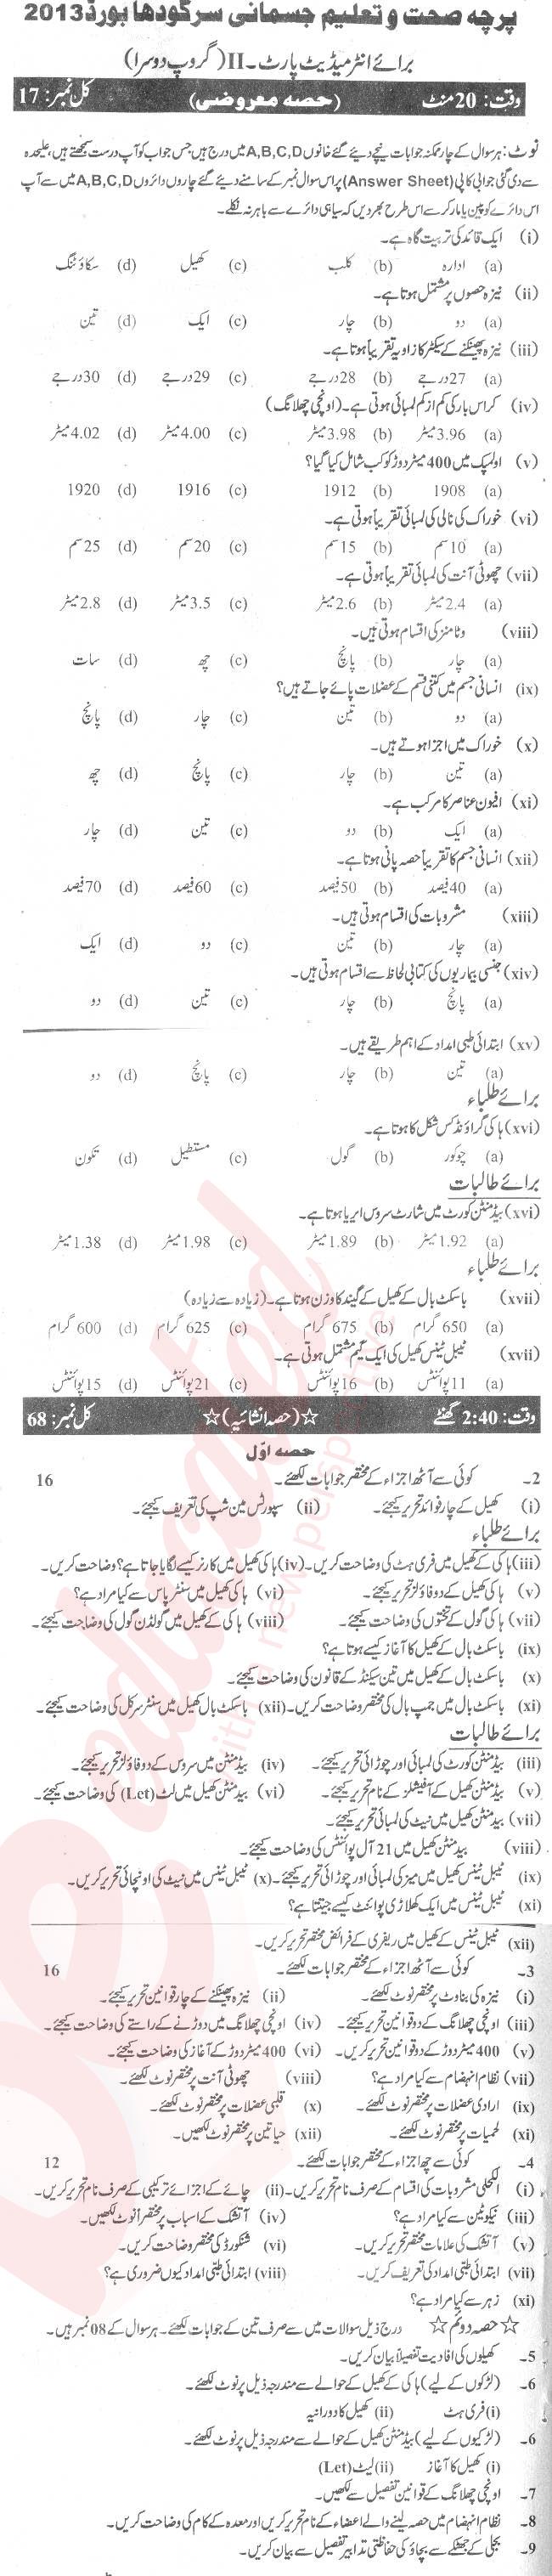 Health and Physical Education FA Part 2 Past Paper Group 2 BISE Sargodha 2013